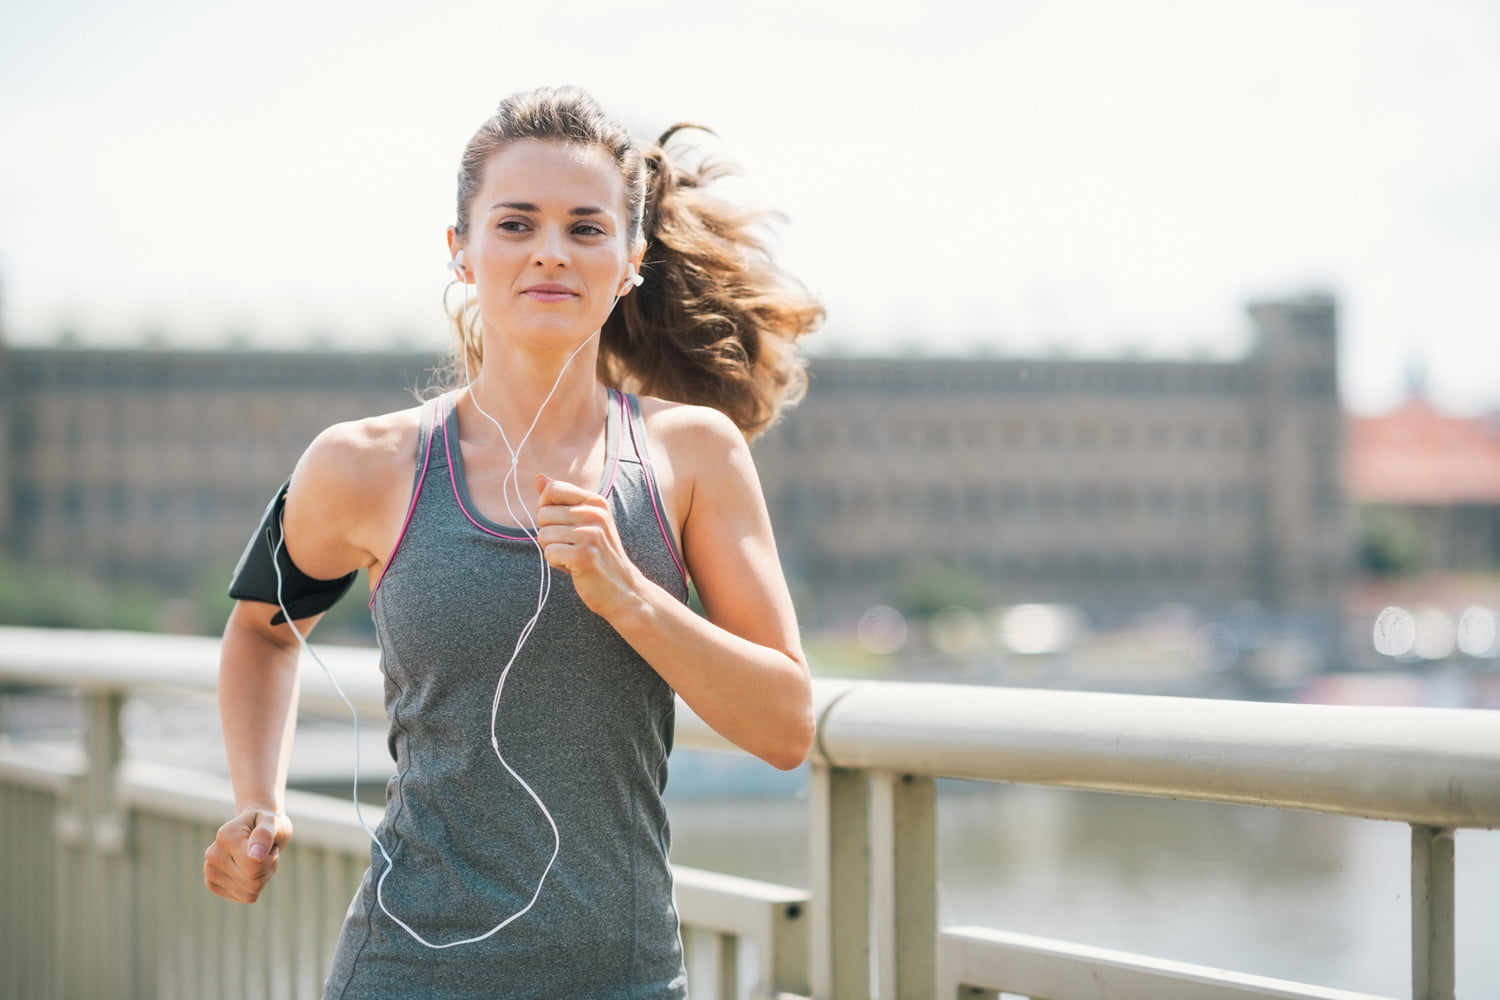 Best Radios for Runners